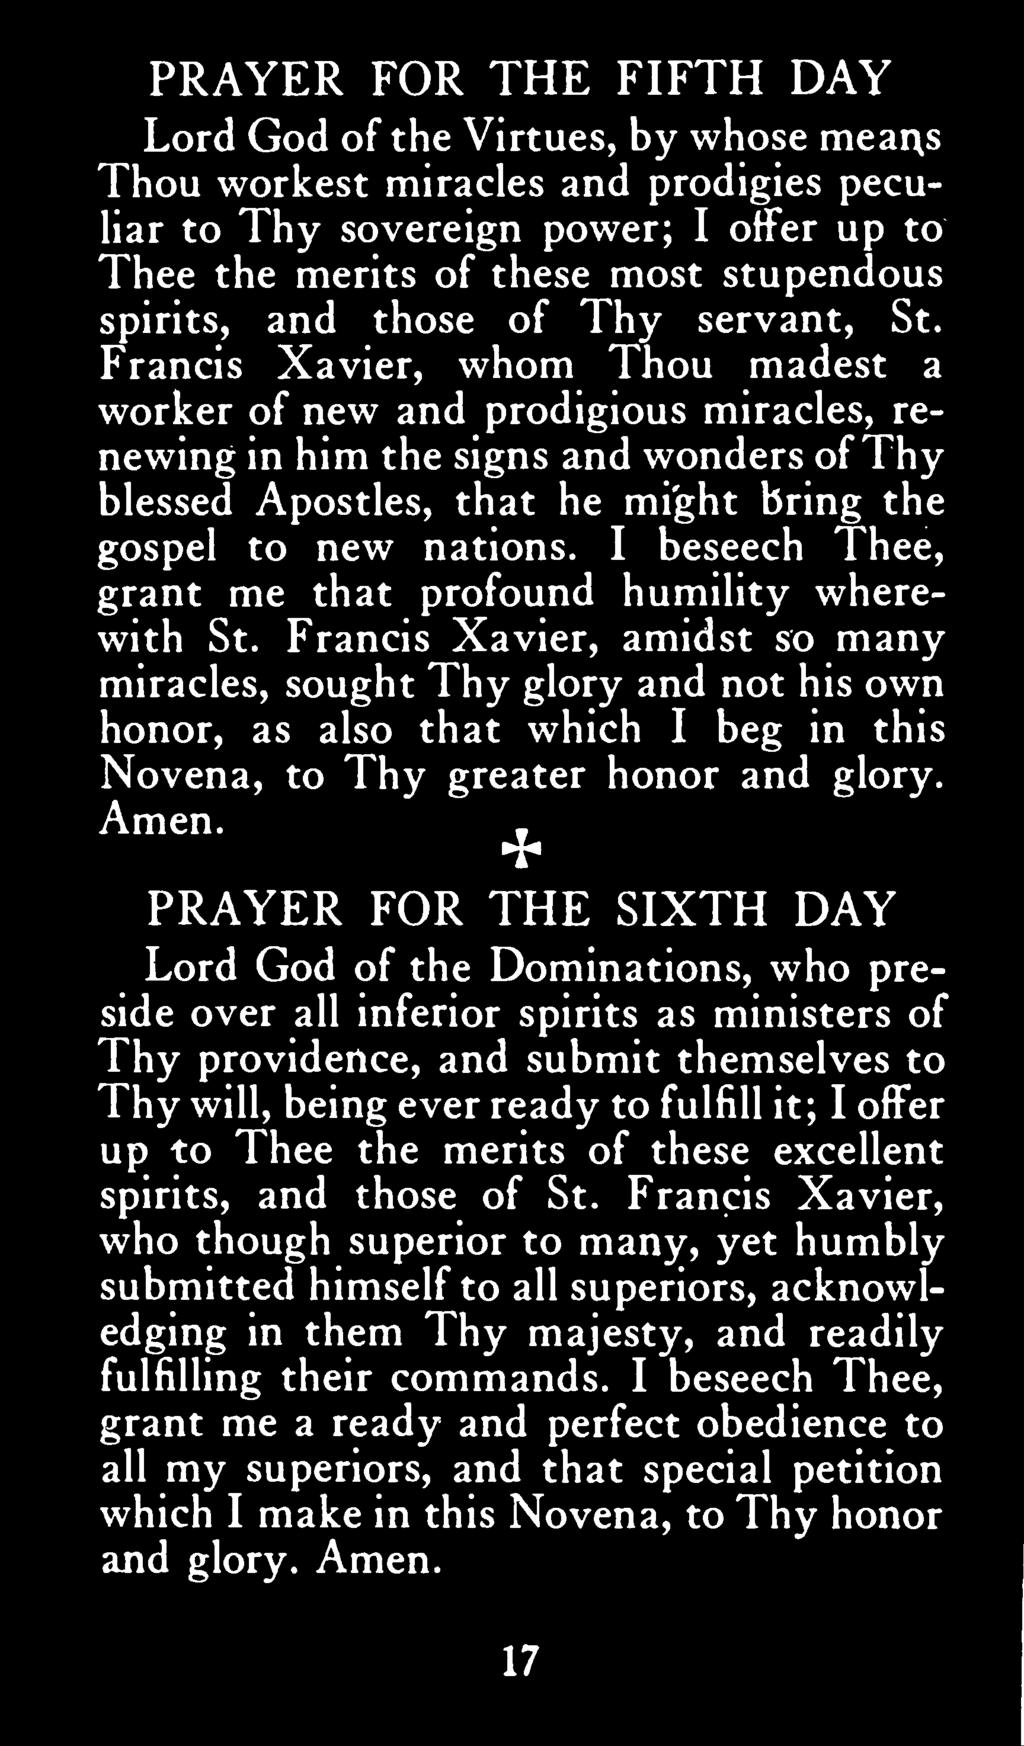 Francis Xavier, amidst so many miracles, sought Thy glory and not his own honor, as also that which I beg in this Novena, to Thy greater honor and glory. Amen.